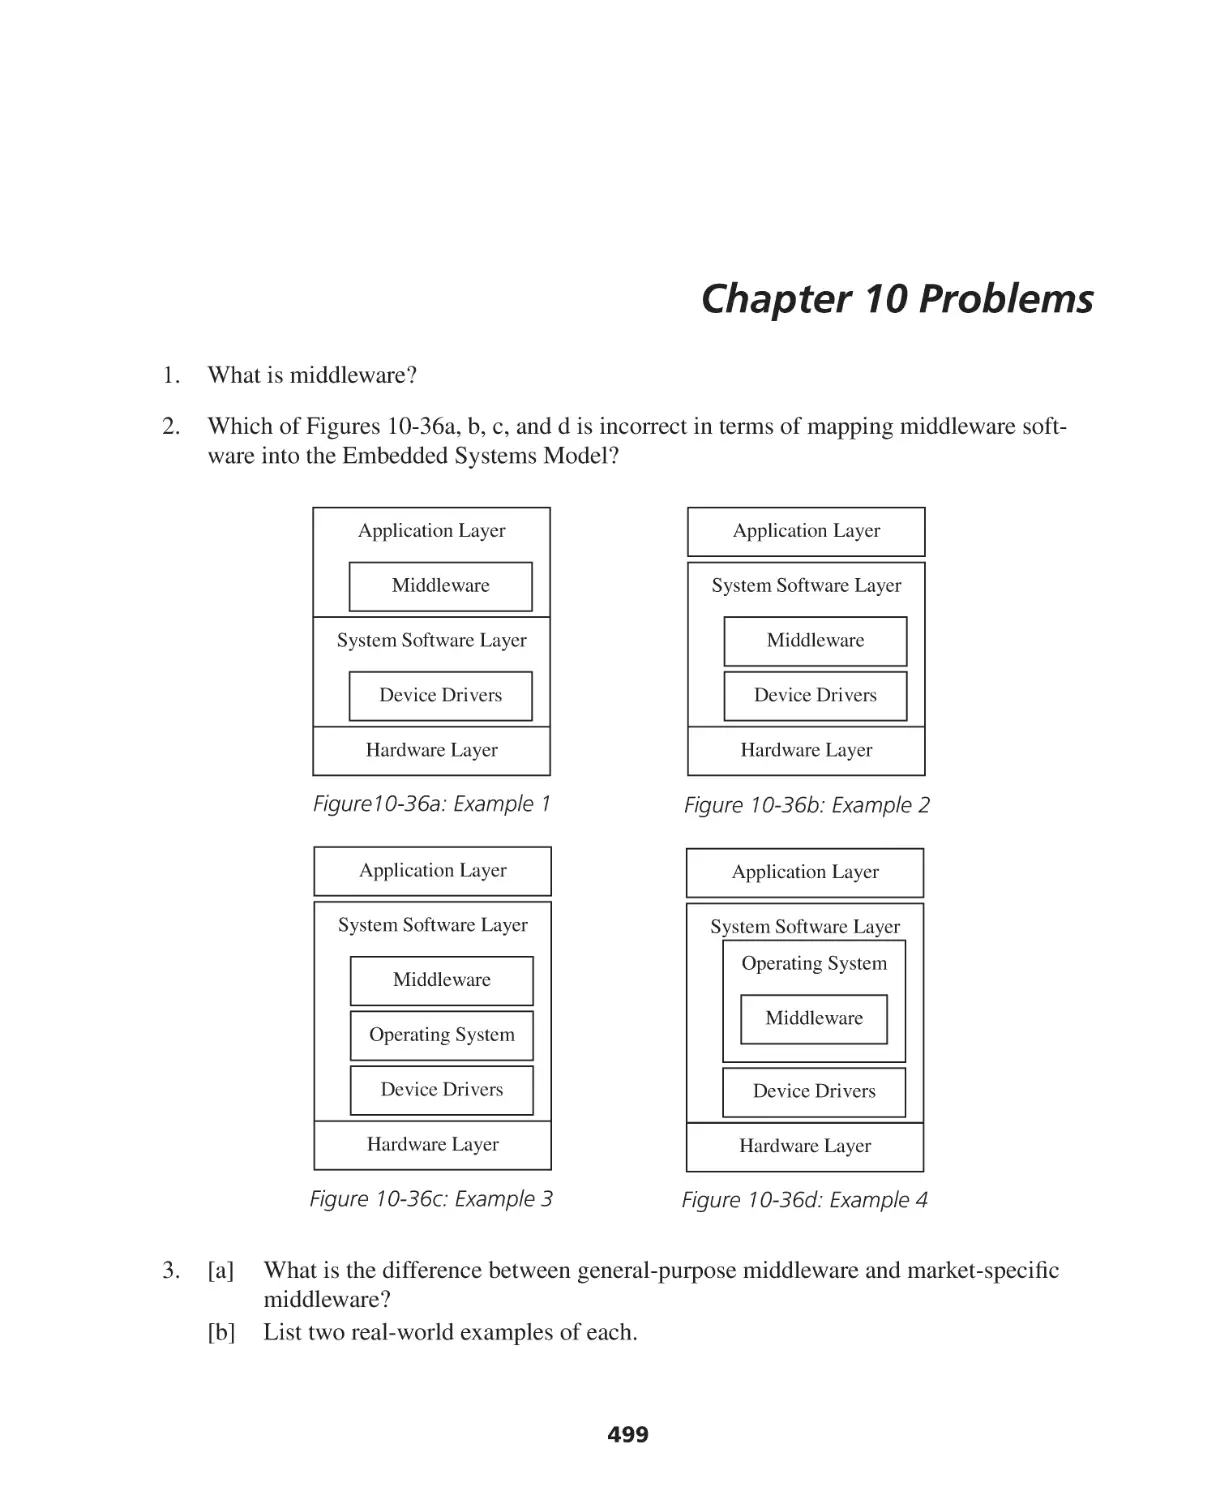 Chapter 10 Problems